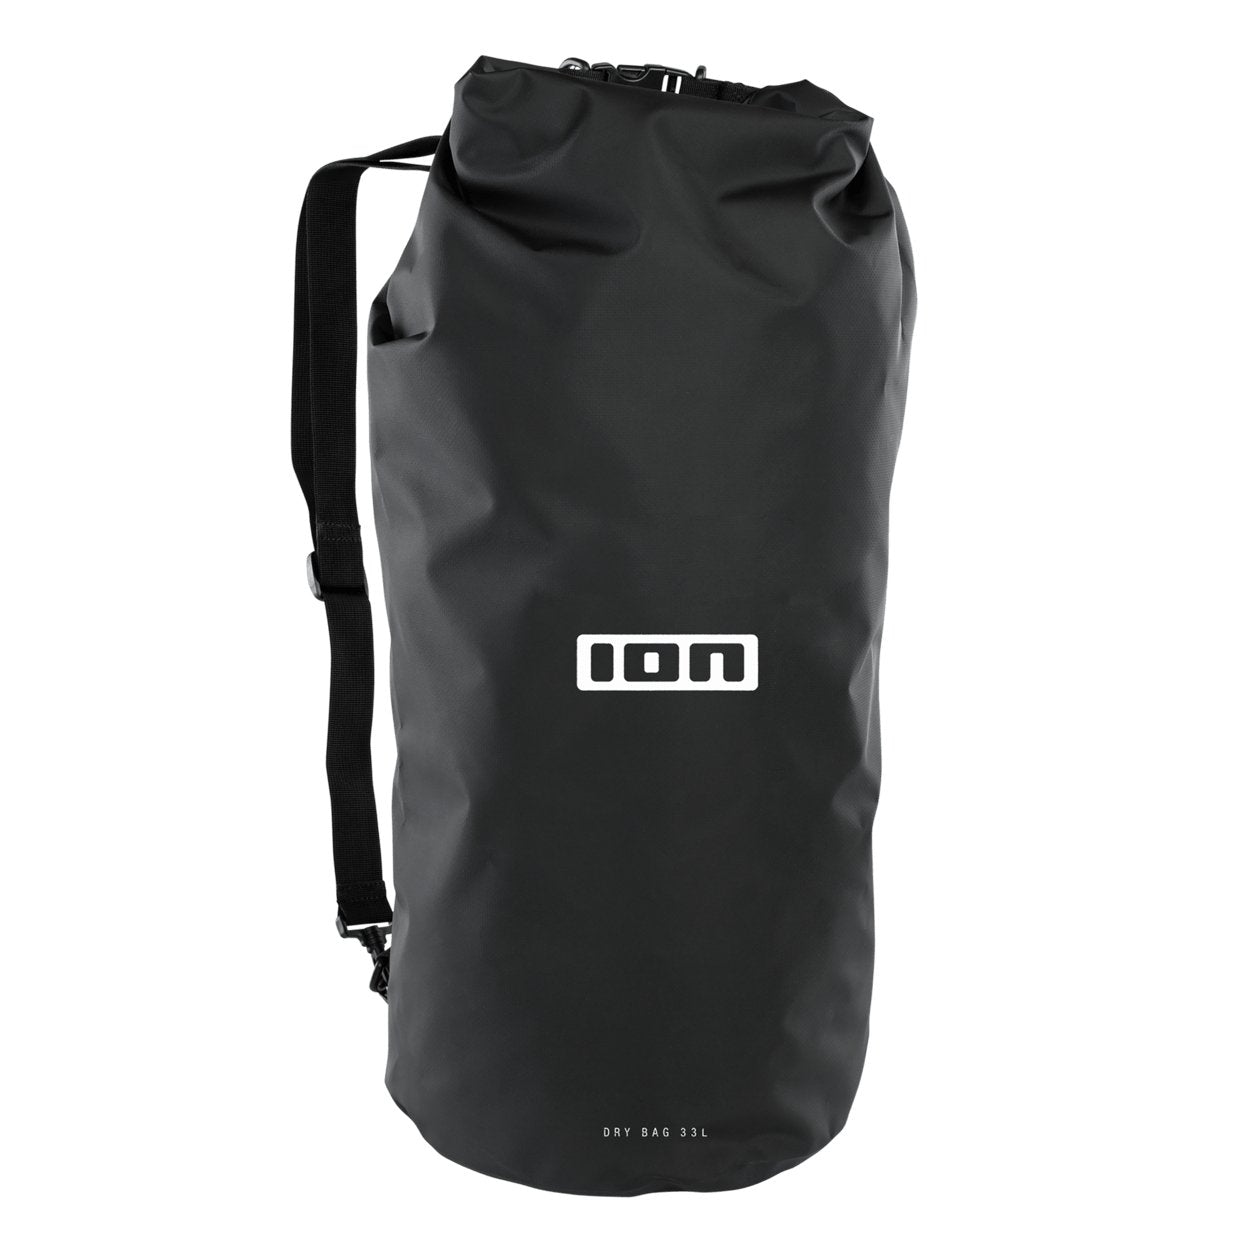 ION Dry Bag 2022 - Worthing Watersports - 9008415812363 - Accessories - ION Water